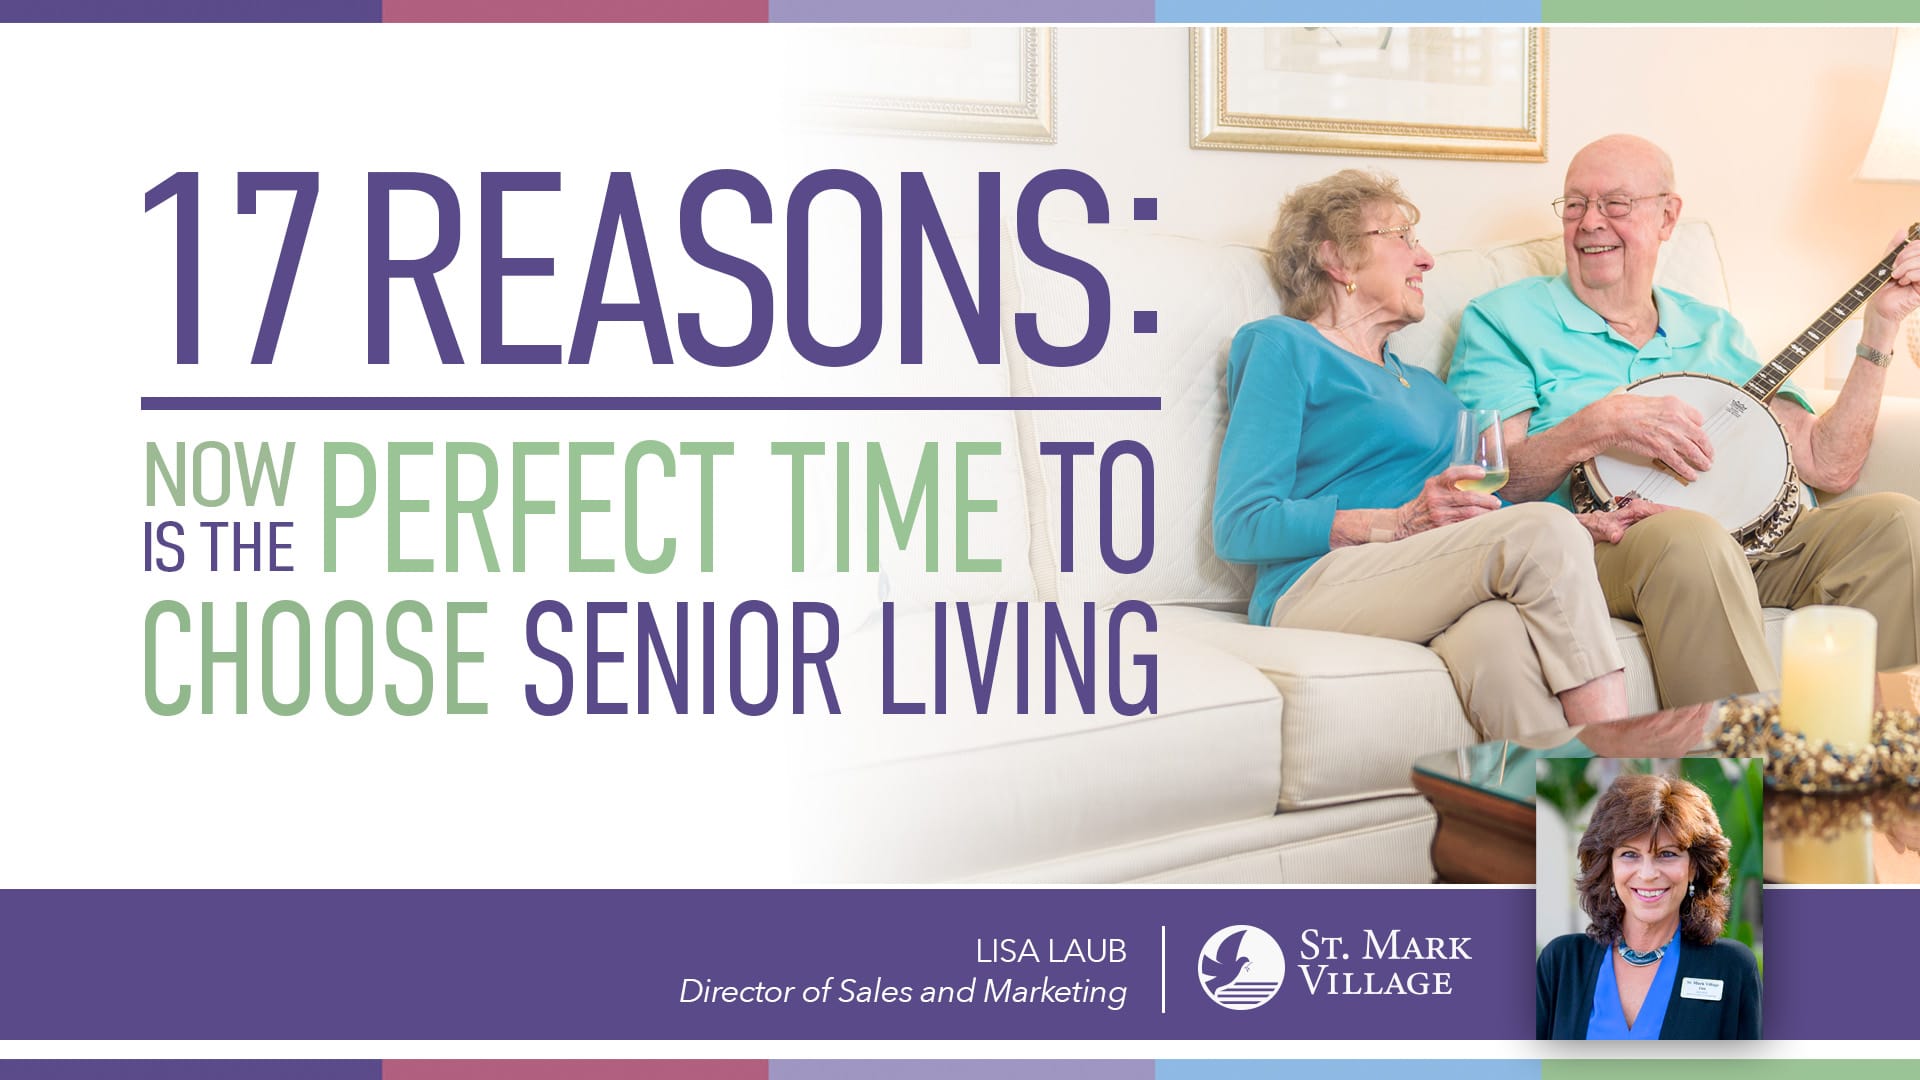 17 reasons is now the perfect time to choose senior living.